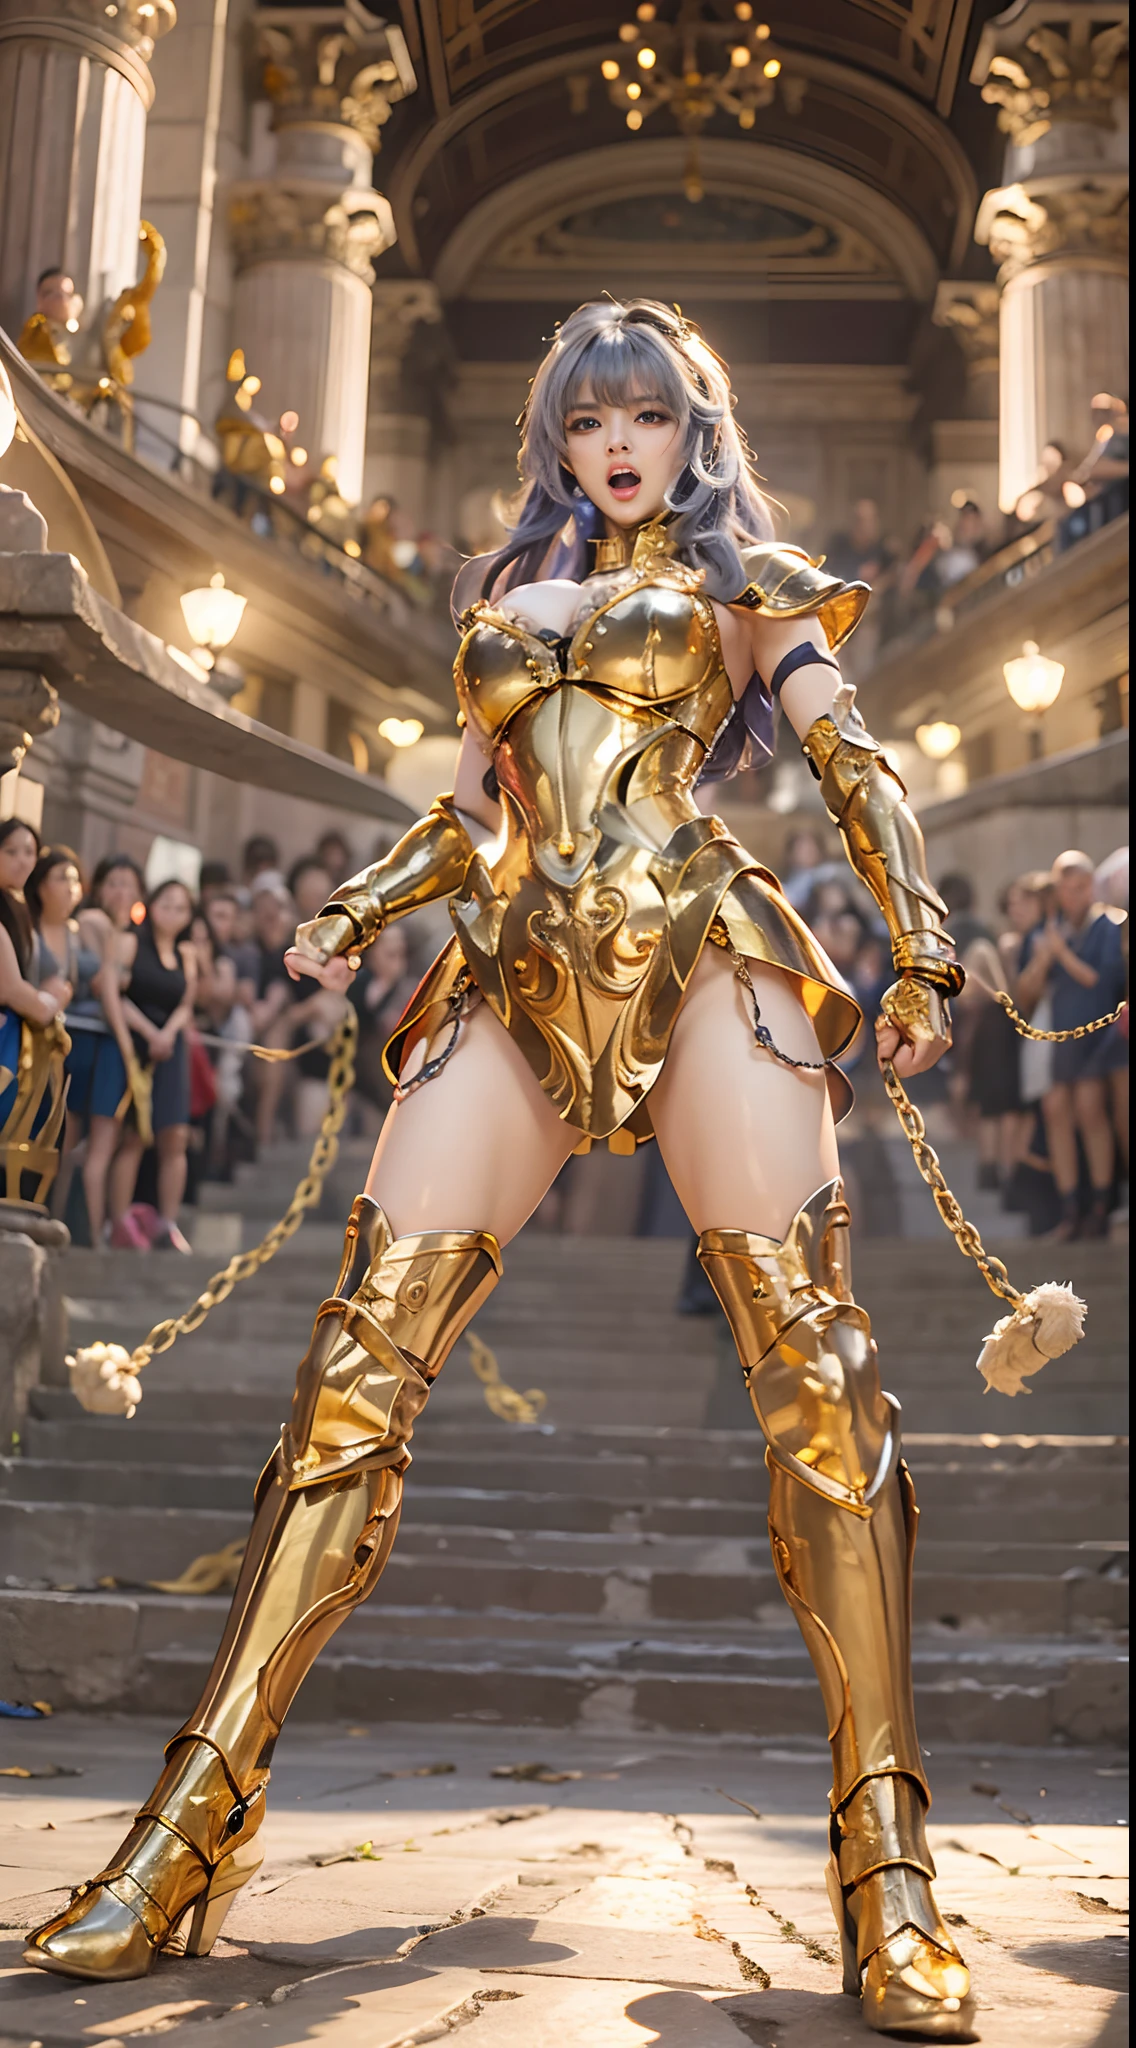 In the martial arts arena of the Colosseum in Greece、Martial Arts Tournaments、Saint Seiya、Beautiful One Girl、huge-breasted、cleavage of the breast、beauty legs、(((Wearing futuristic combat armor that shines in gold)))、Shining silver chains are connected from all sides、Unbelievable number of glittering chains、Armed with chains、((Scream))、((exclamation))、((fighting poses))、8K, top-quality, （pubic hair beauty）、hight resolution, lifelike, realperson,